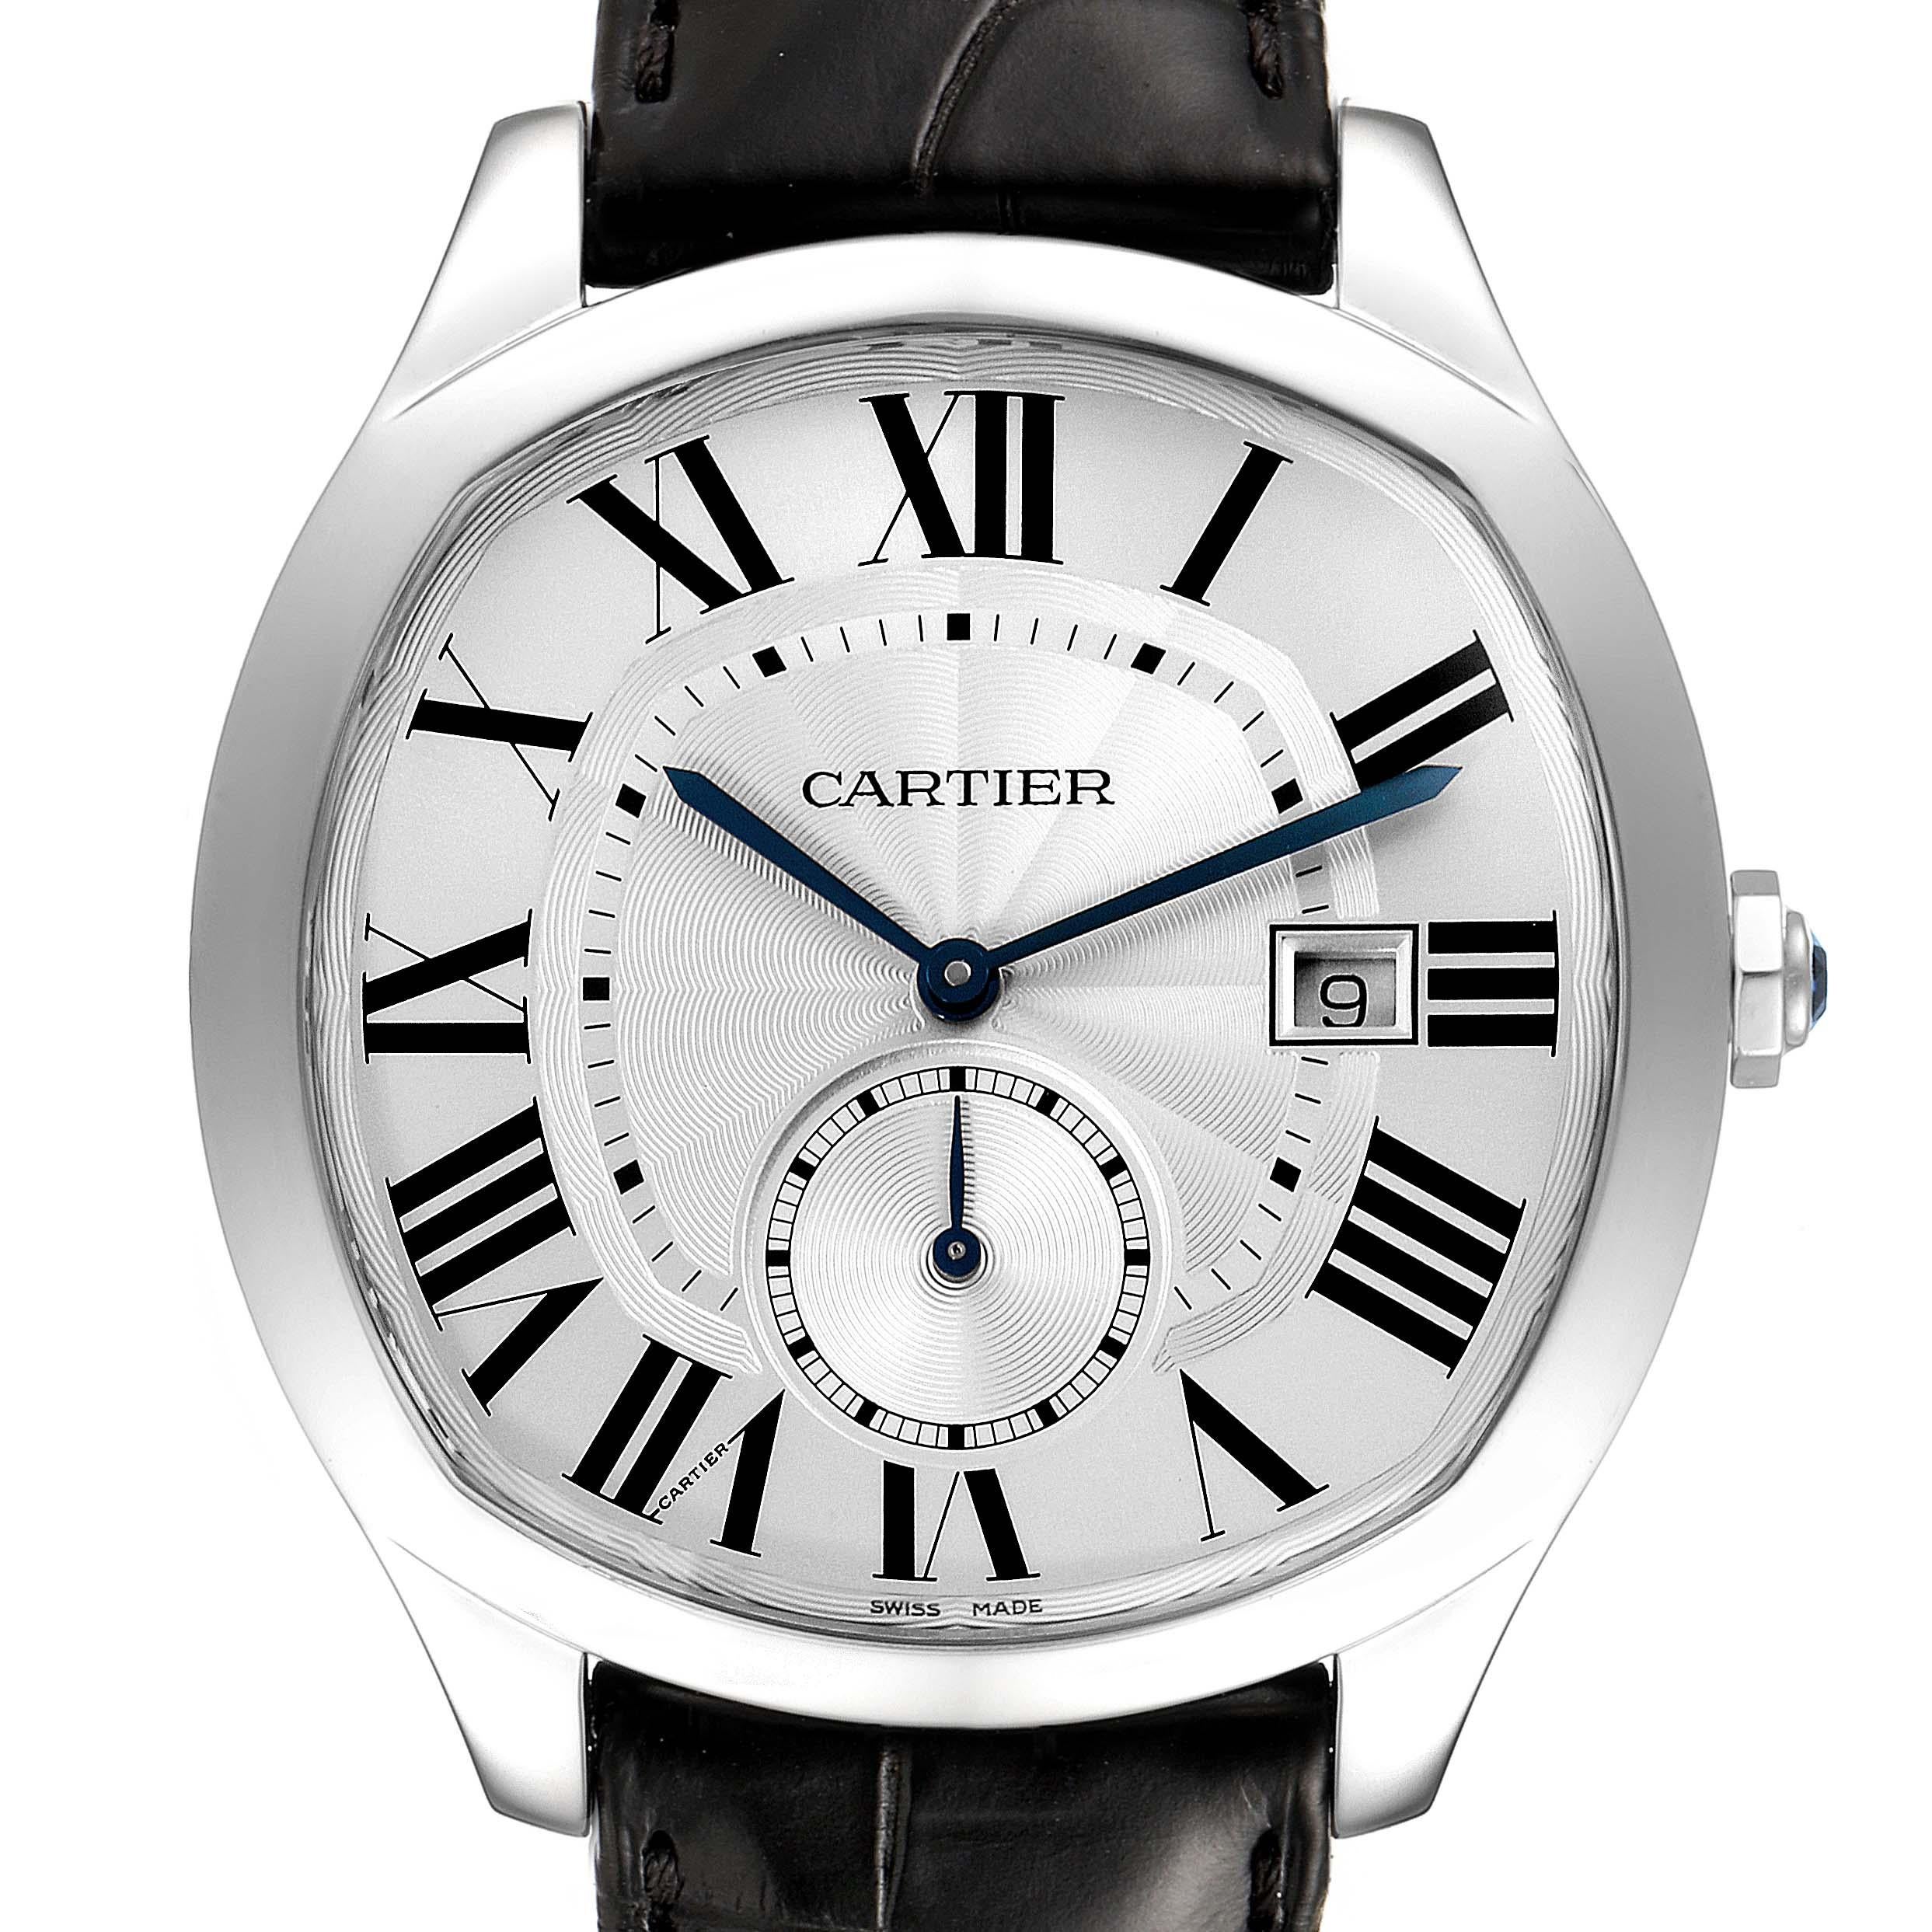 Cartier Drive de Cartier Silver Dial Steel Mens Watch WSNM0004. Automatic self-winding movement. Cousion shape stainless steel case 40.0 mm in diameter. Crown cover with faceted blue spinel. Exhibition transparent sapphire crystal case back.